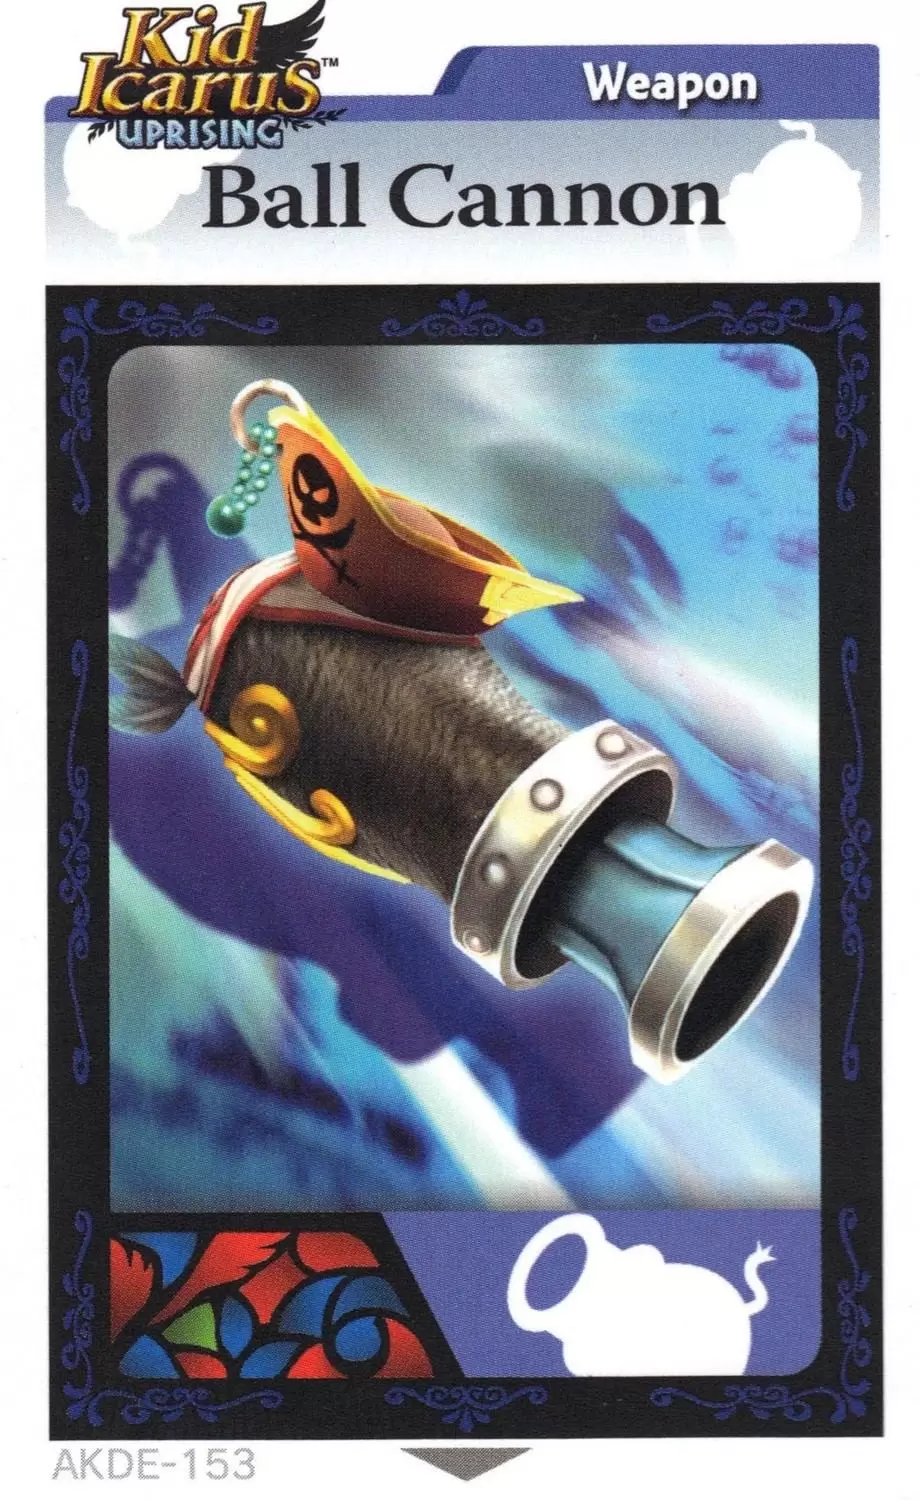 Kid Icarus Uprising AR cards - Ball Cannon